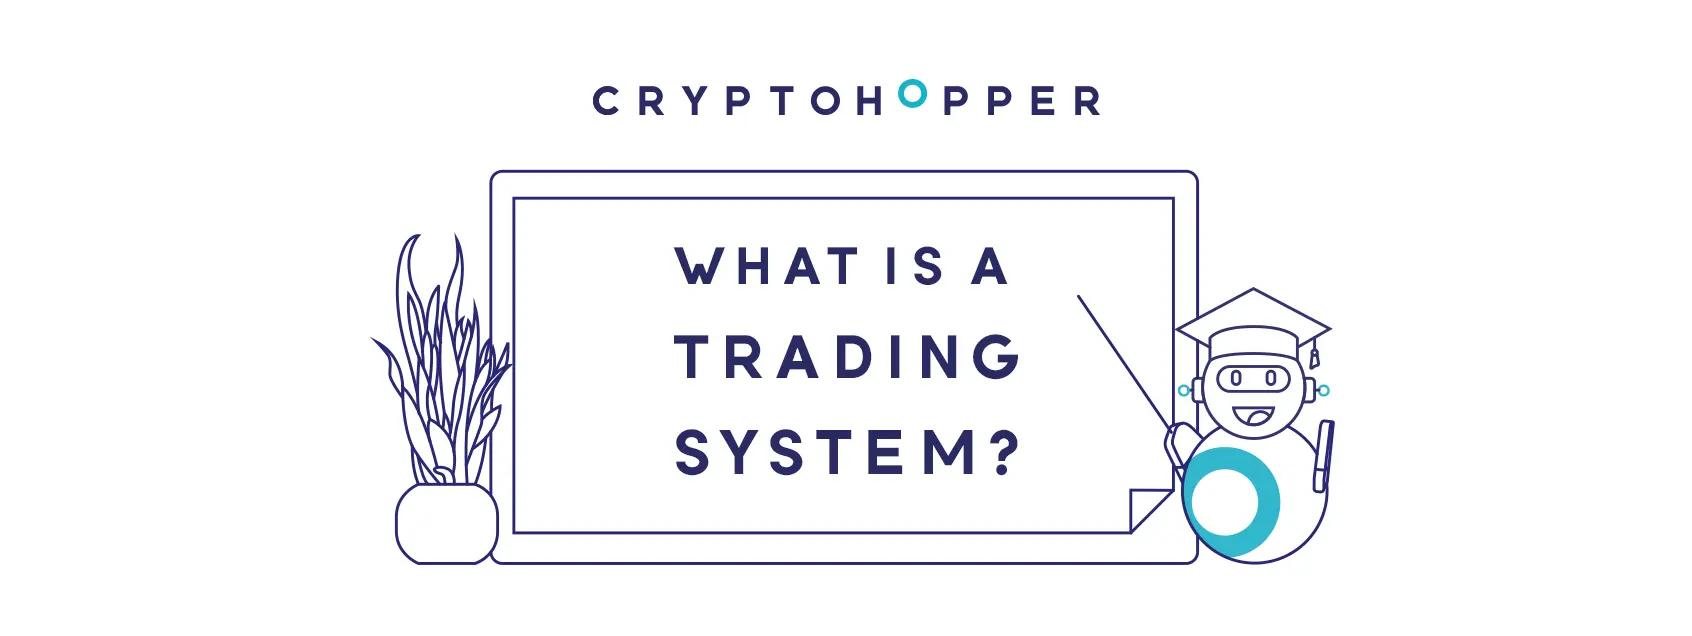 What Is A Trading System?